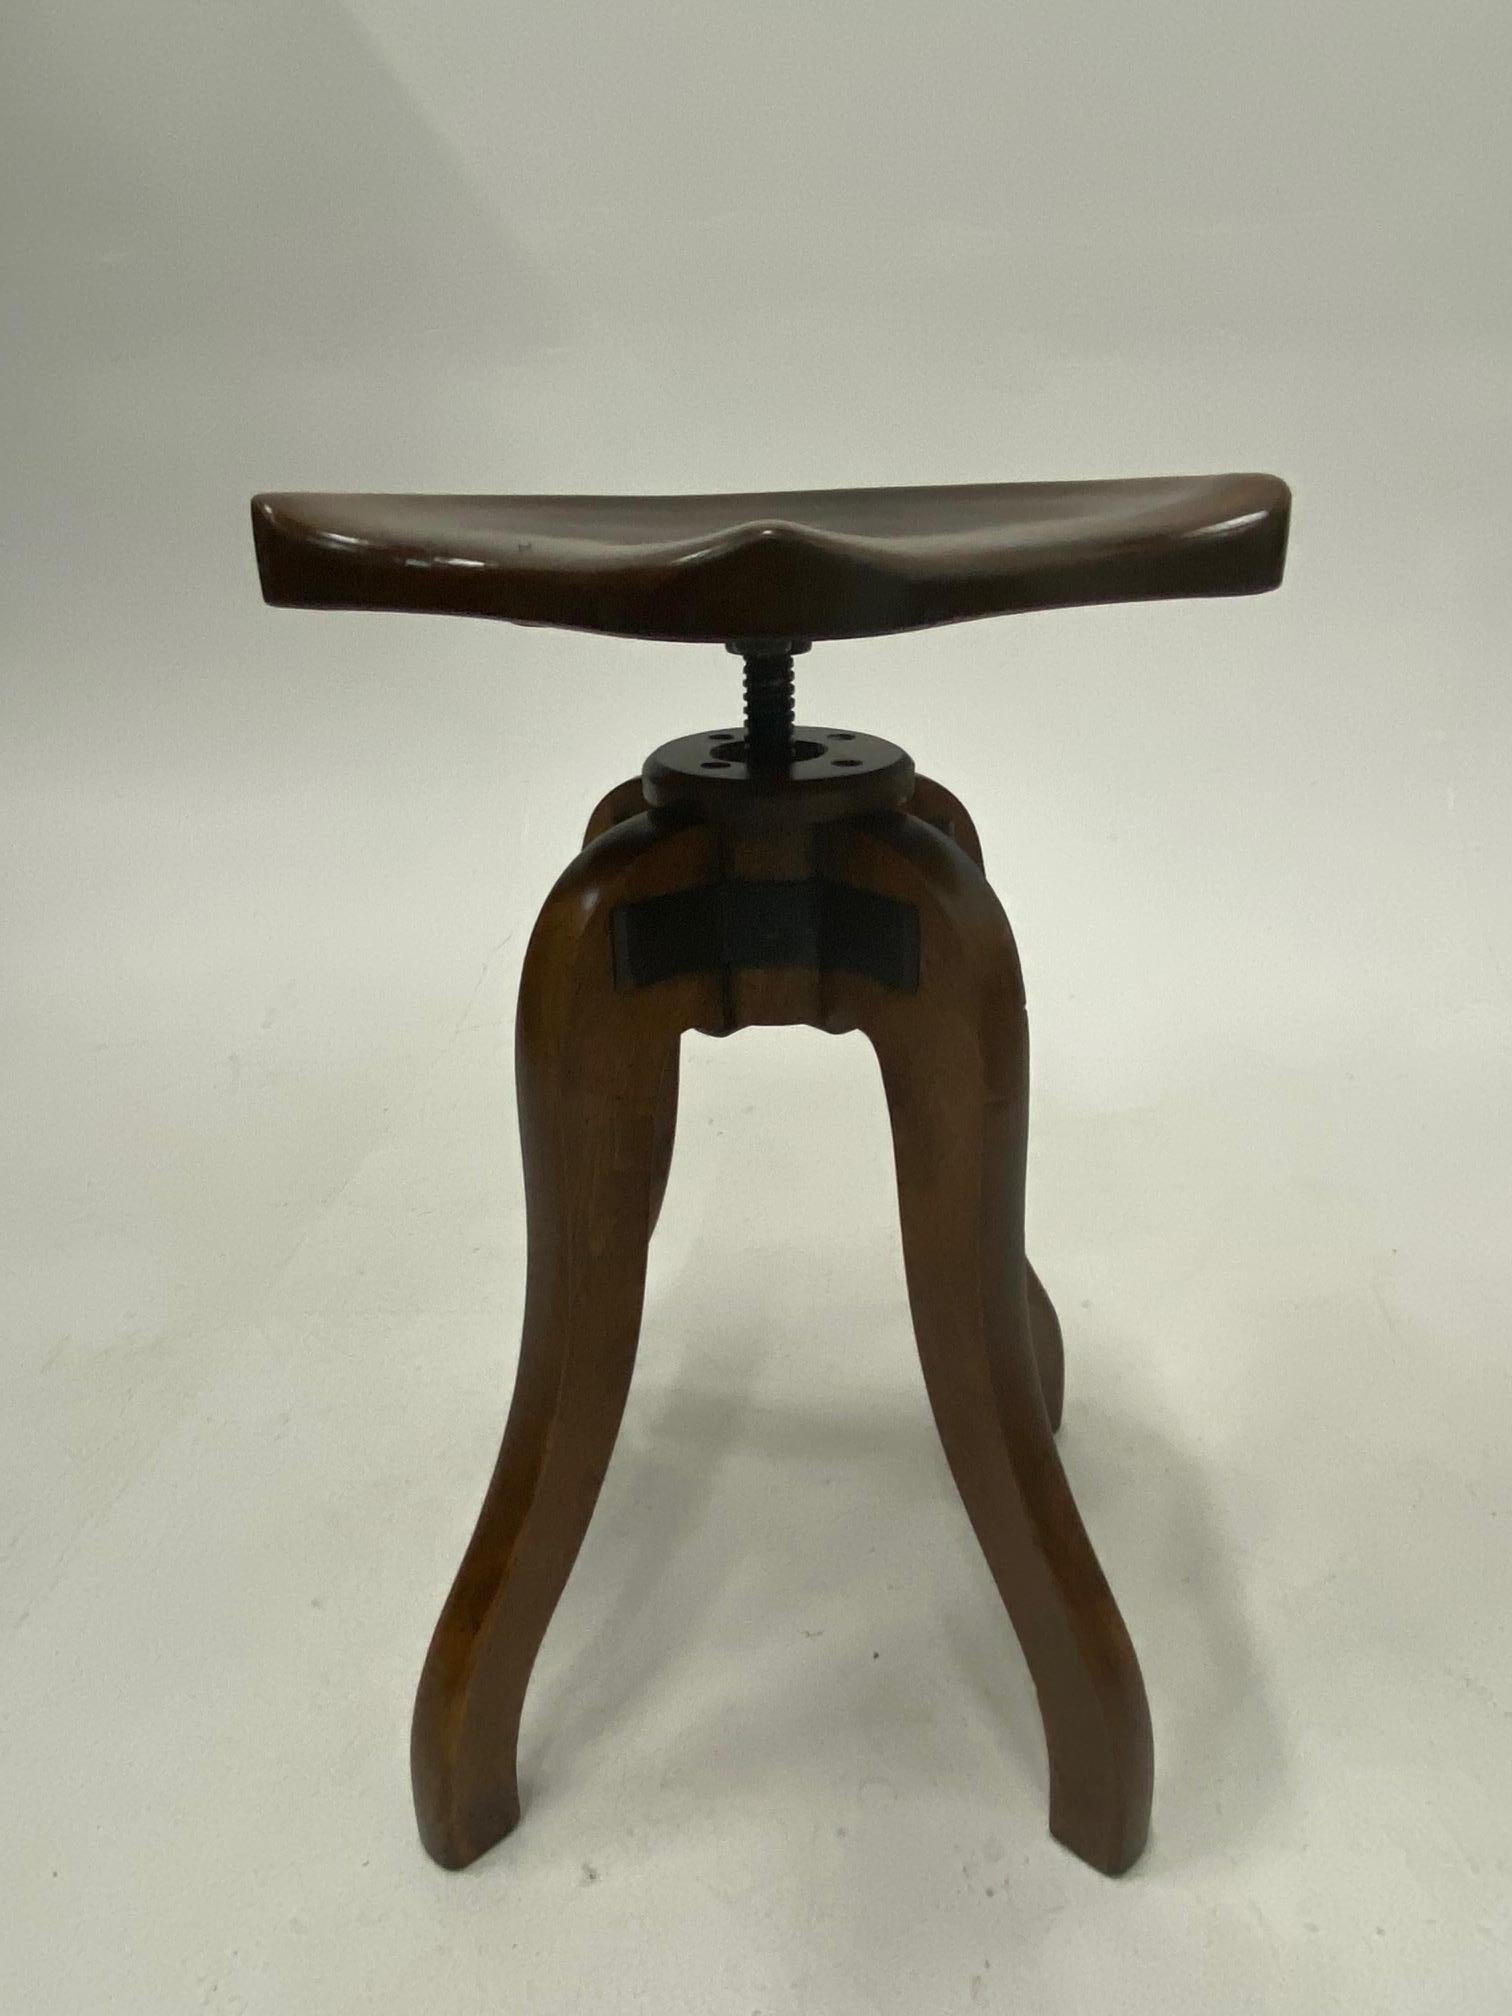 Handsome beautifully crafted adjustable carved wood industrial stool having saddle shaped seat and curvy legs.
Measures: Lowest 23
Highest 26.